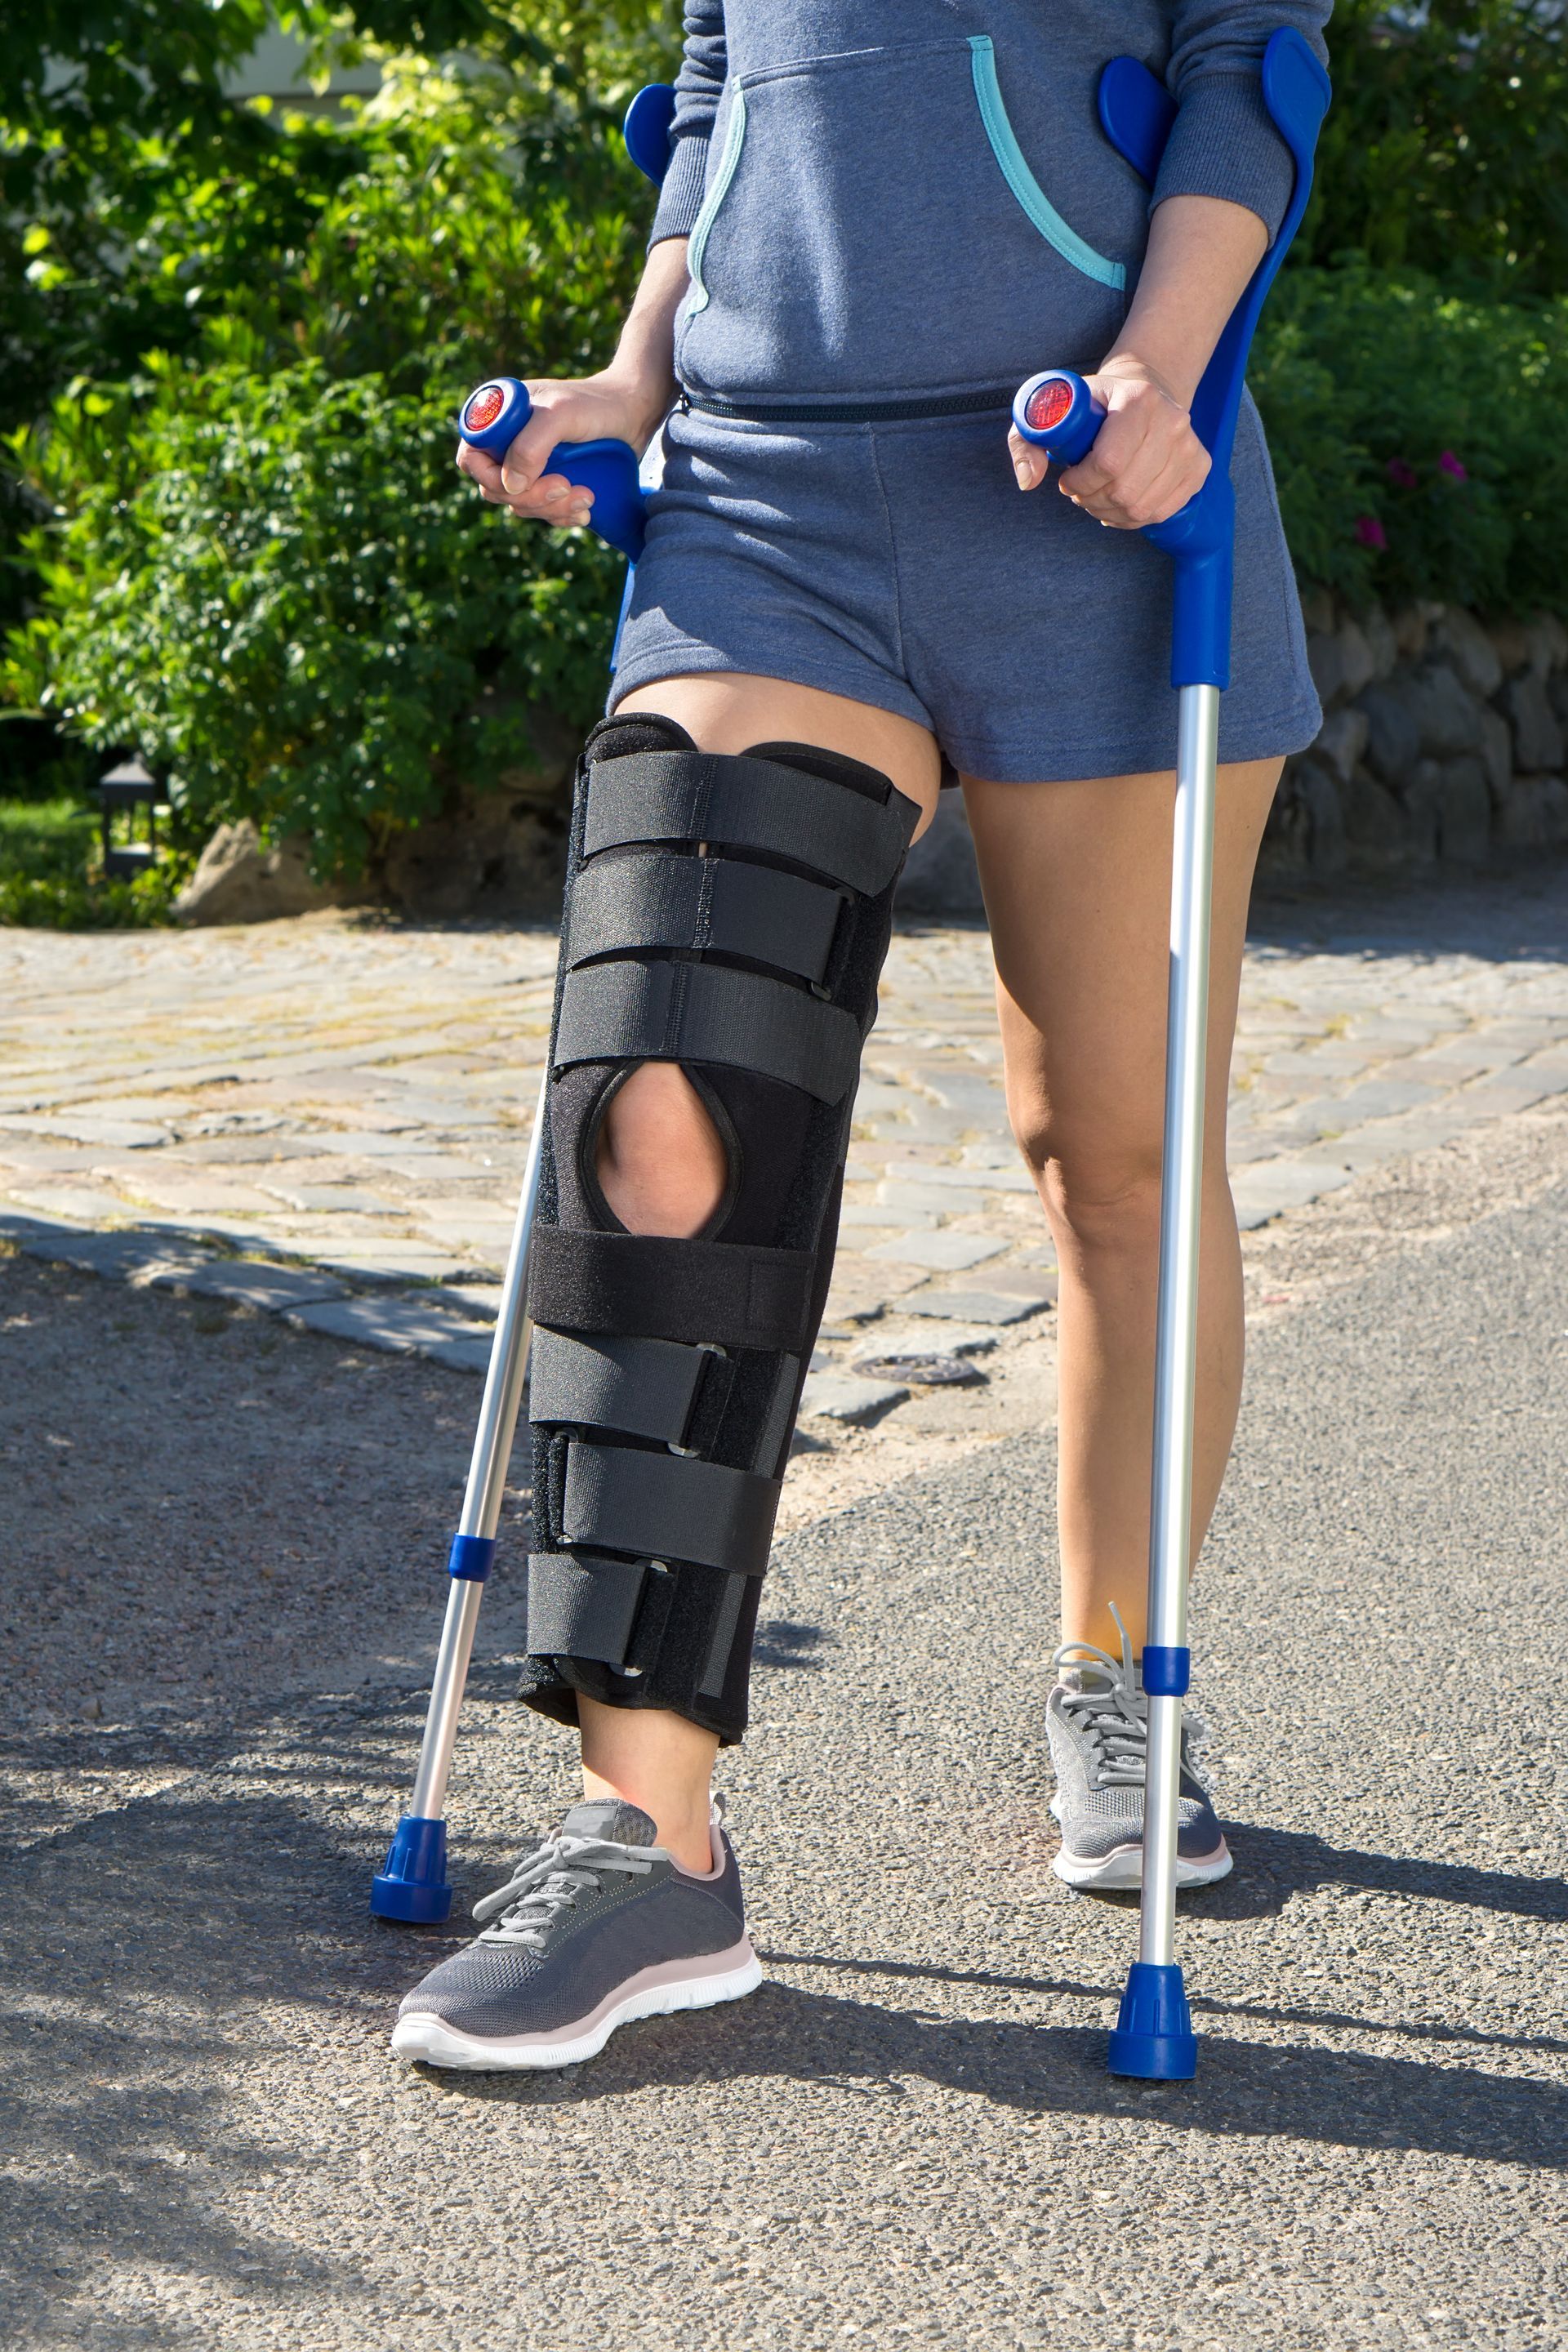 A woman with a knee brace and crutches is walking down the street.